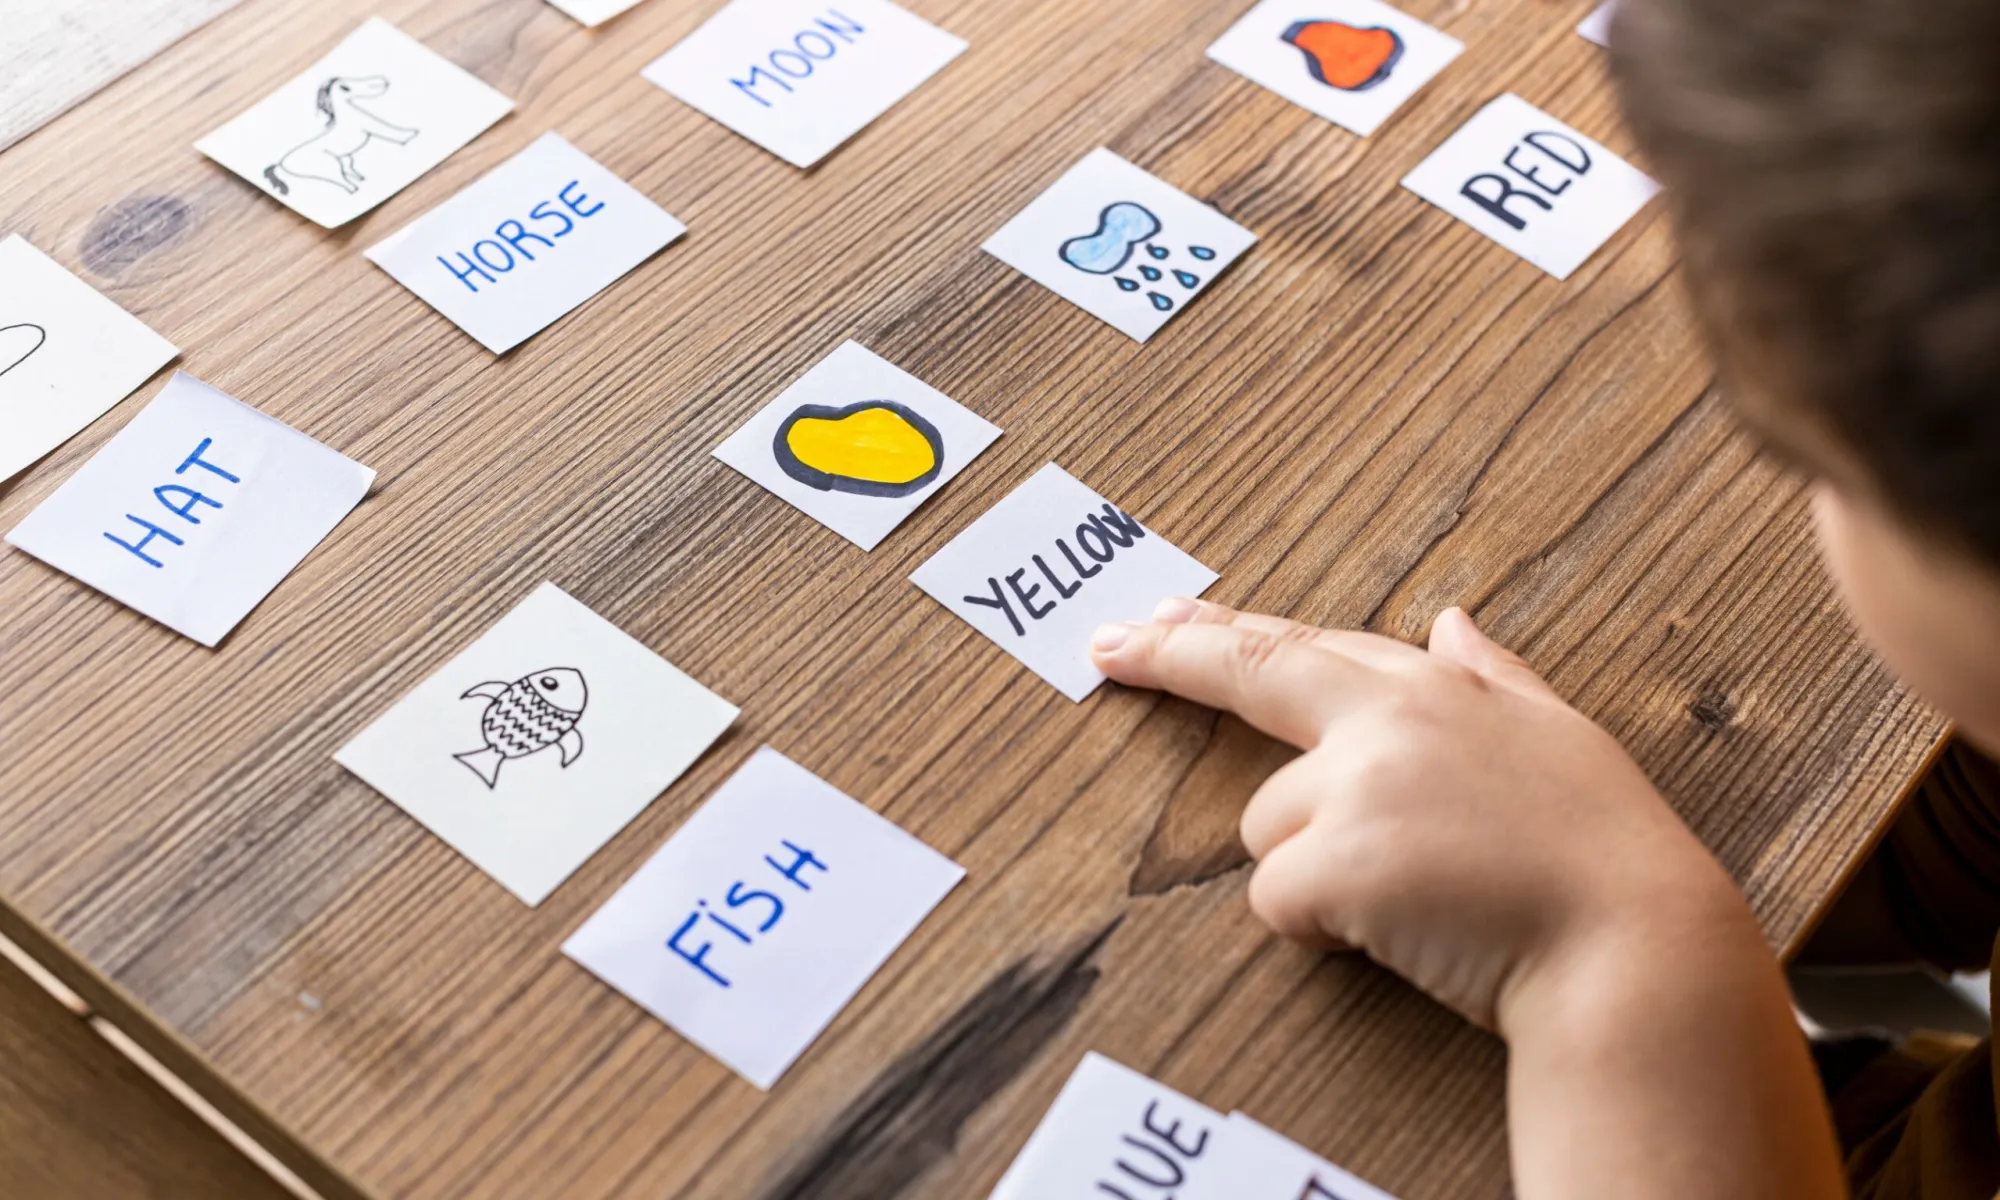 a Little kid playing with cards of words and pictures